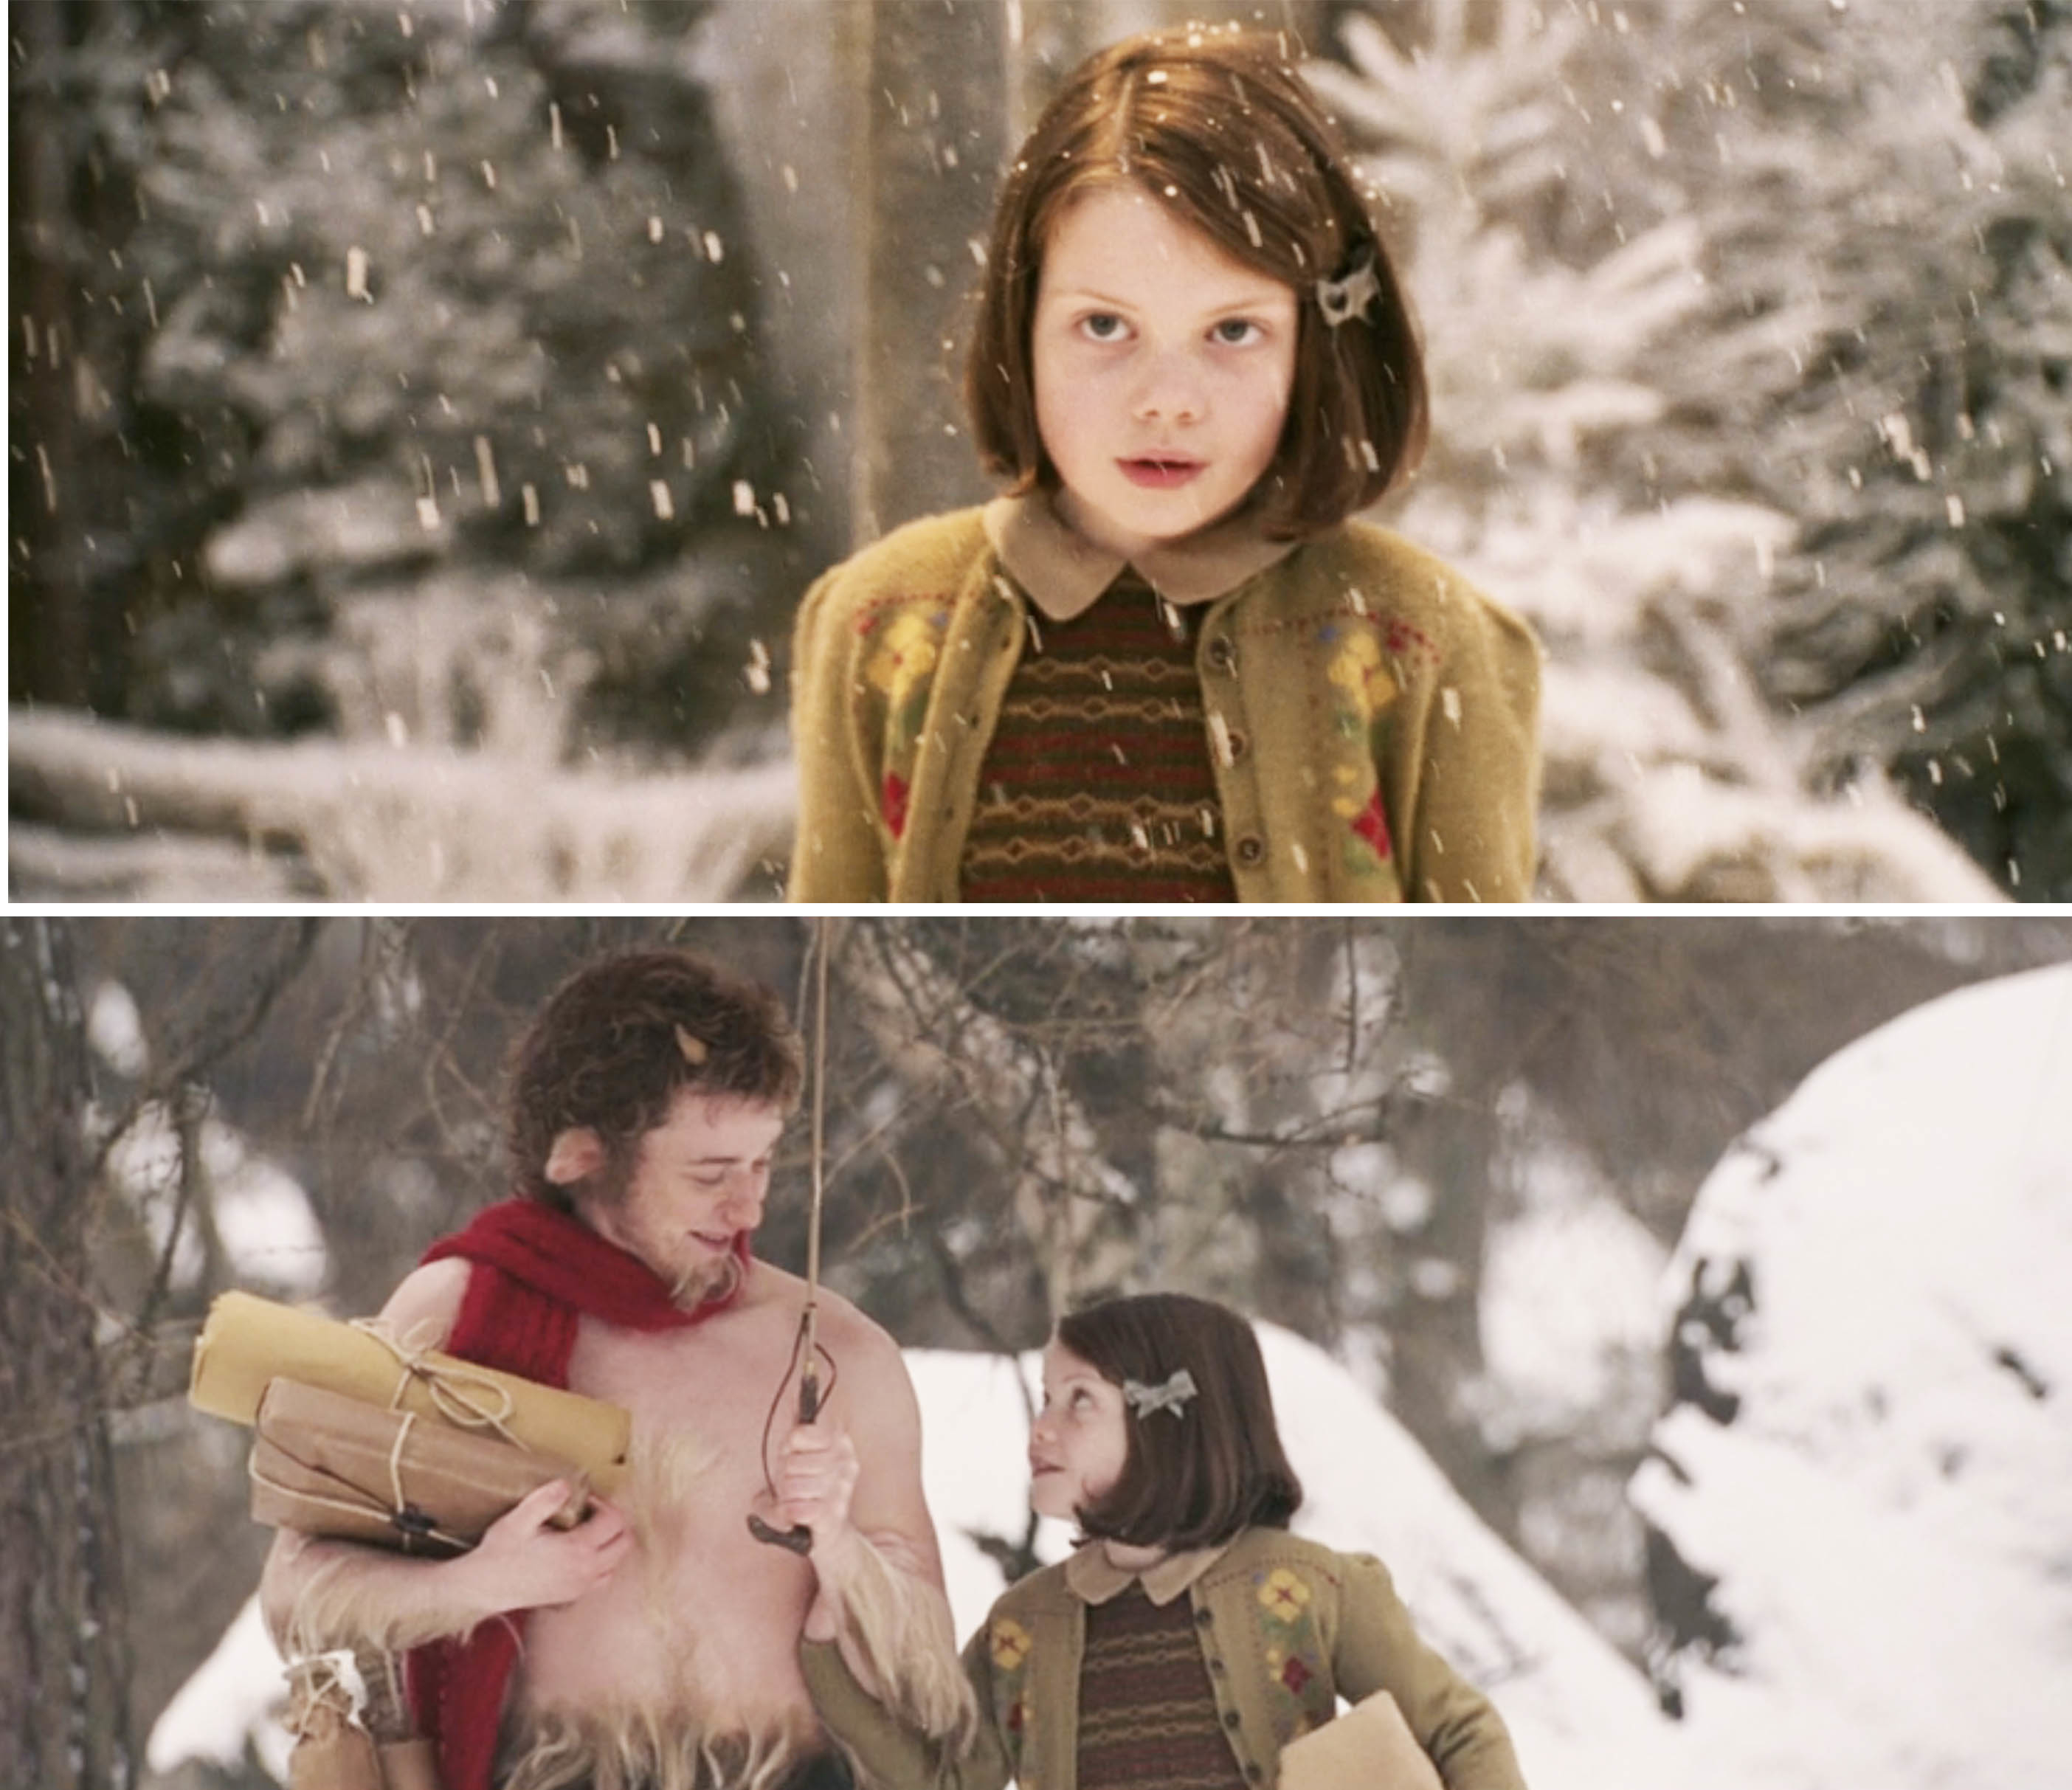 James McAvoy as Mr. Tumnus and Georgie Henley as Lucy Pevensie walking through the snow in &quot;The Chronicles of Narnia&quot;